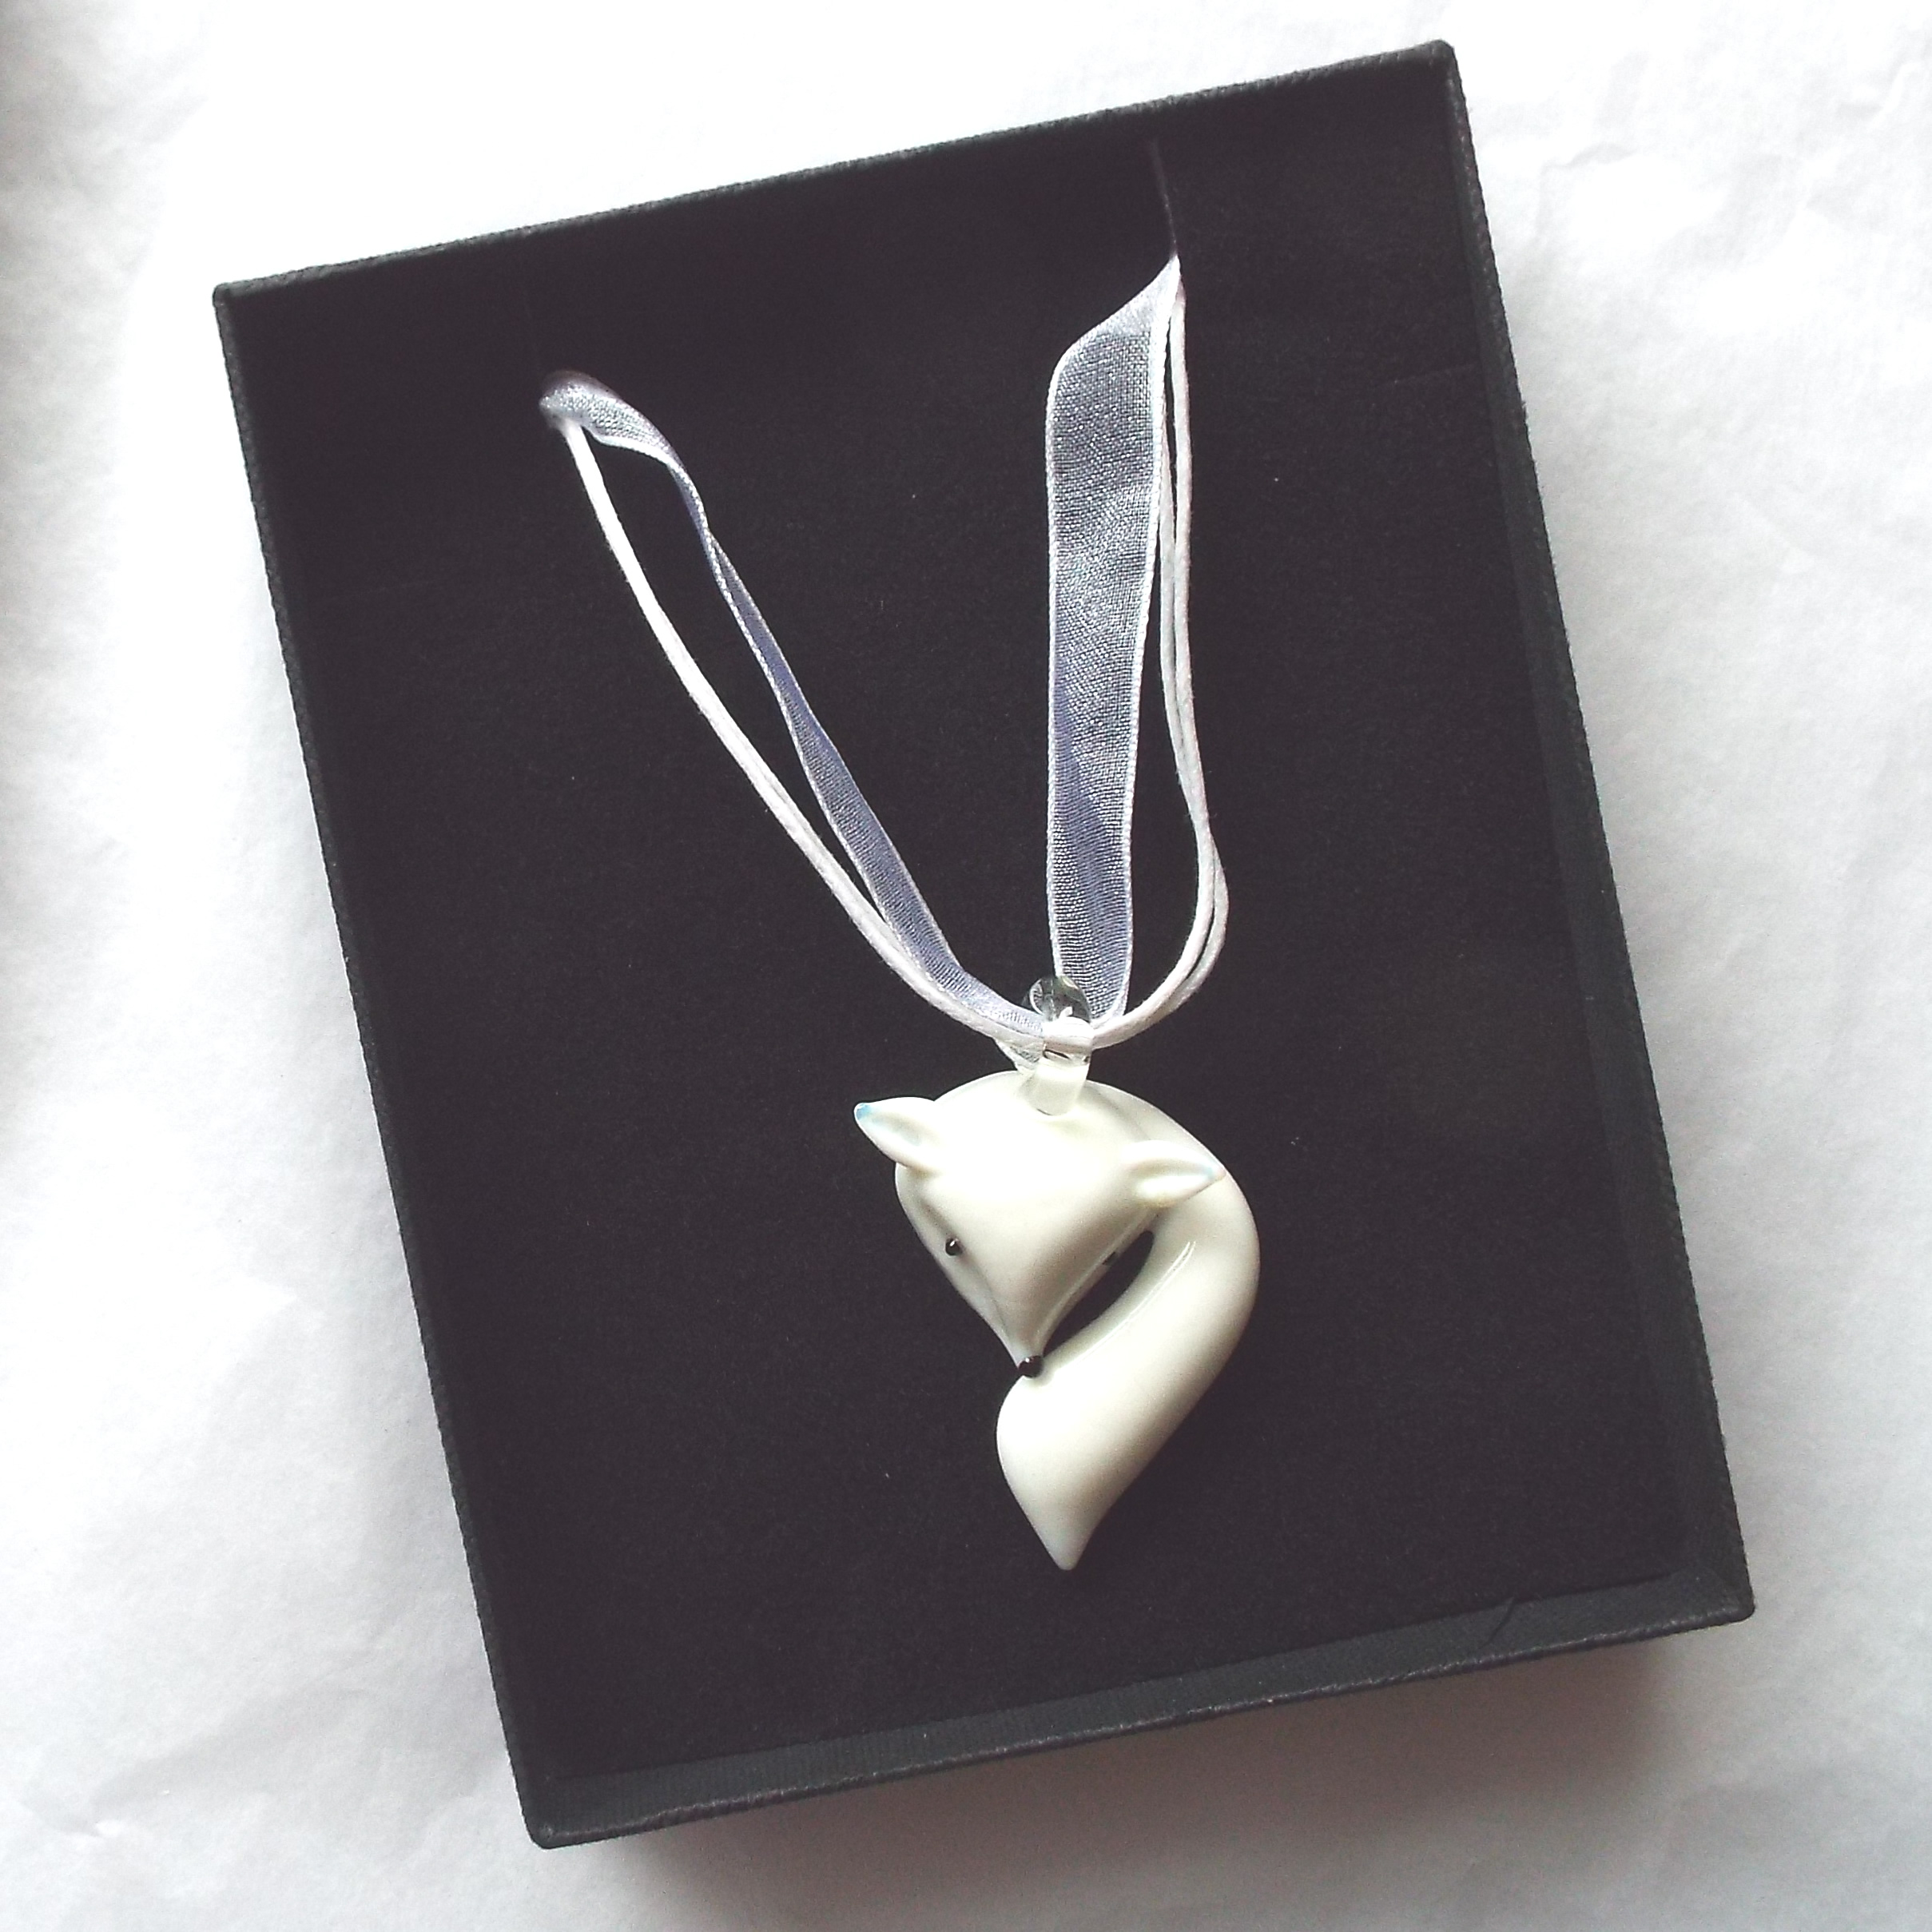 White Glass Fox Necklace in Gift Box